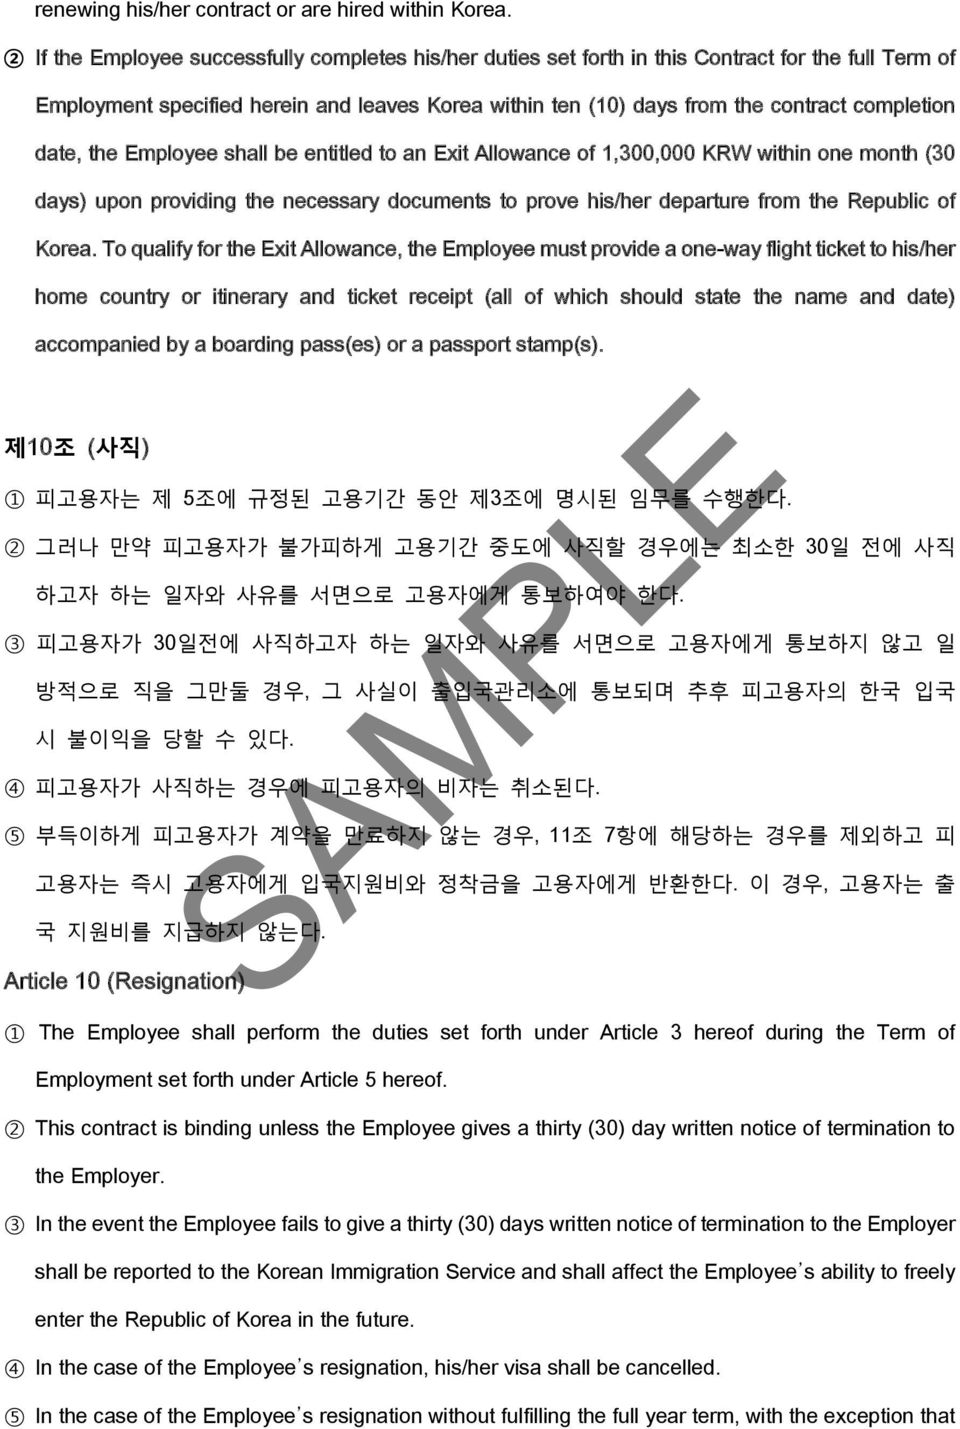 date, the Employee shall be entitled to an Exit Allowance of 1,300,000 KRW within one month (30 days) upon providing the necessary documents to prove his/her departure from the Republic of Korea.